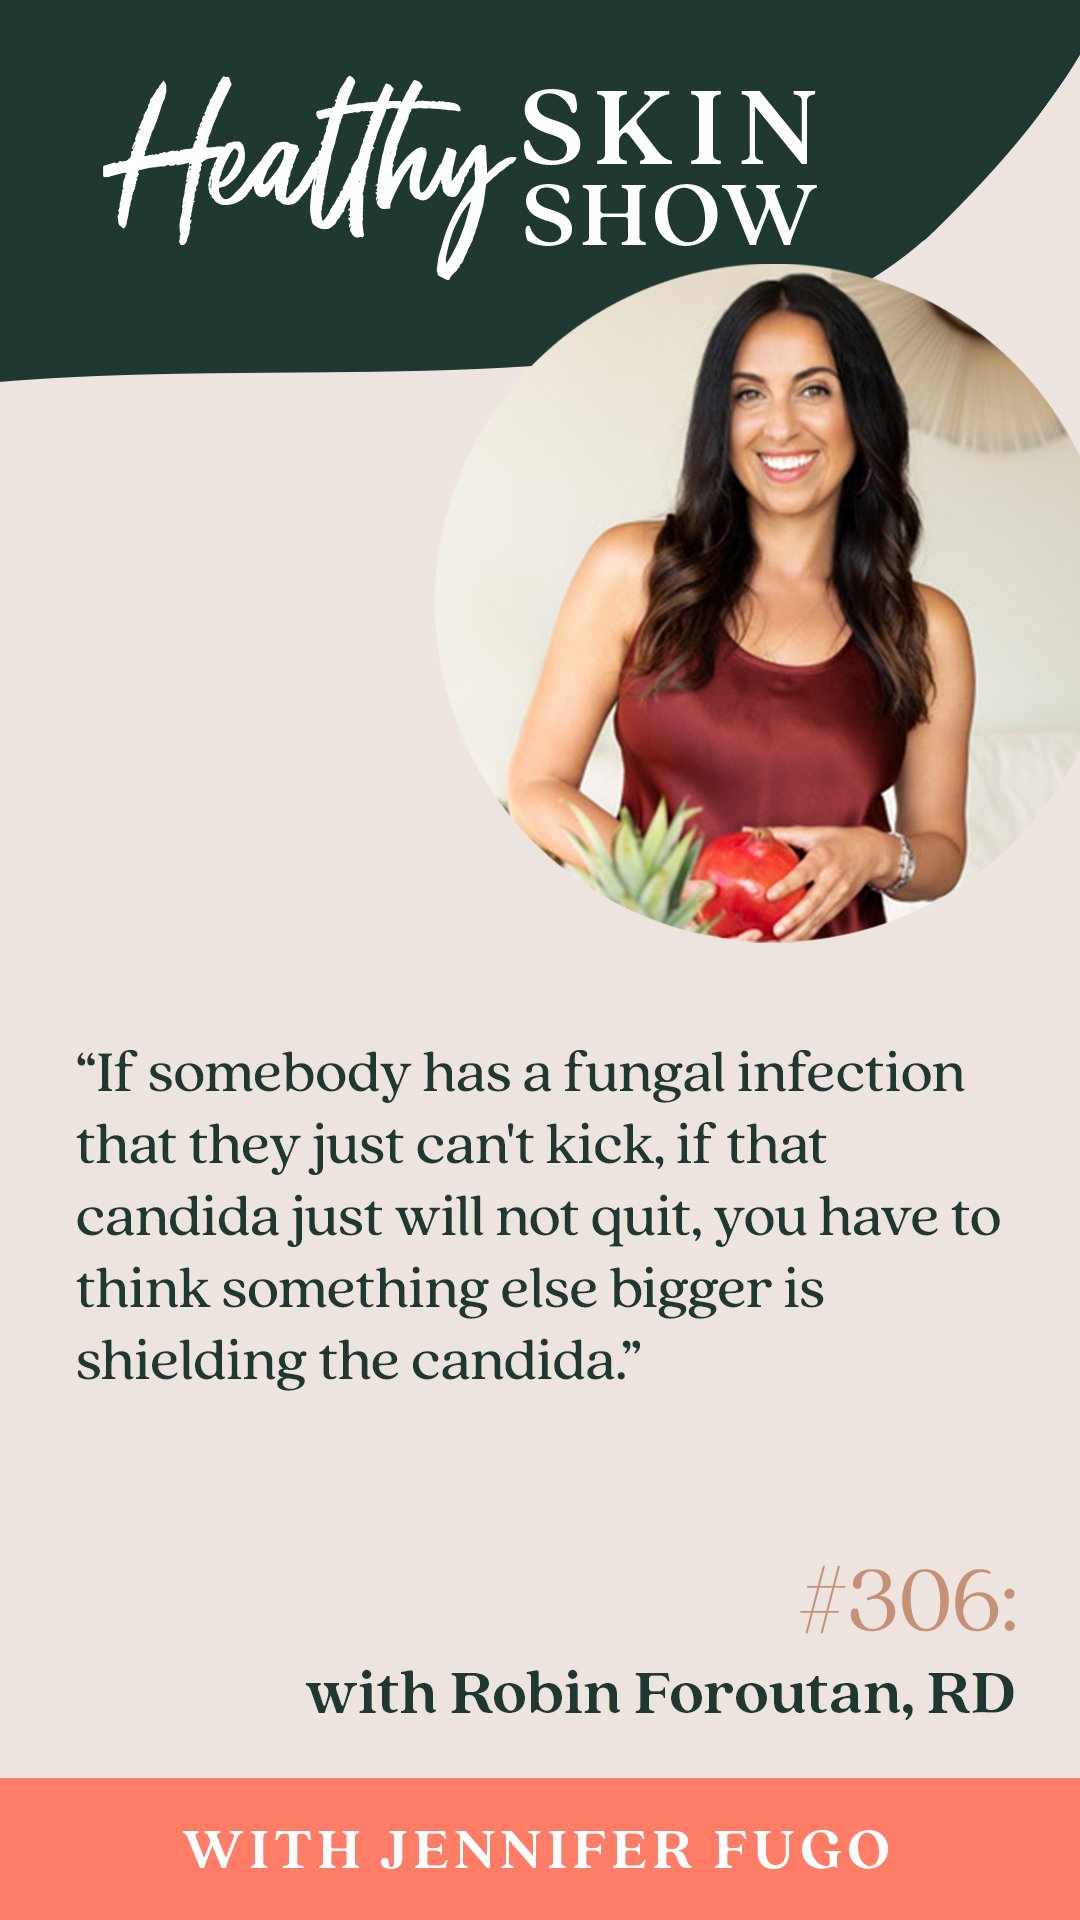 "If somebody has a fungal infection that they just can't kick, if that candida just will not quit, you have to think something else bigger is shielding the candida."